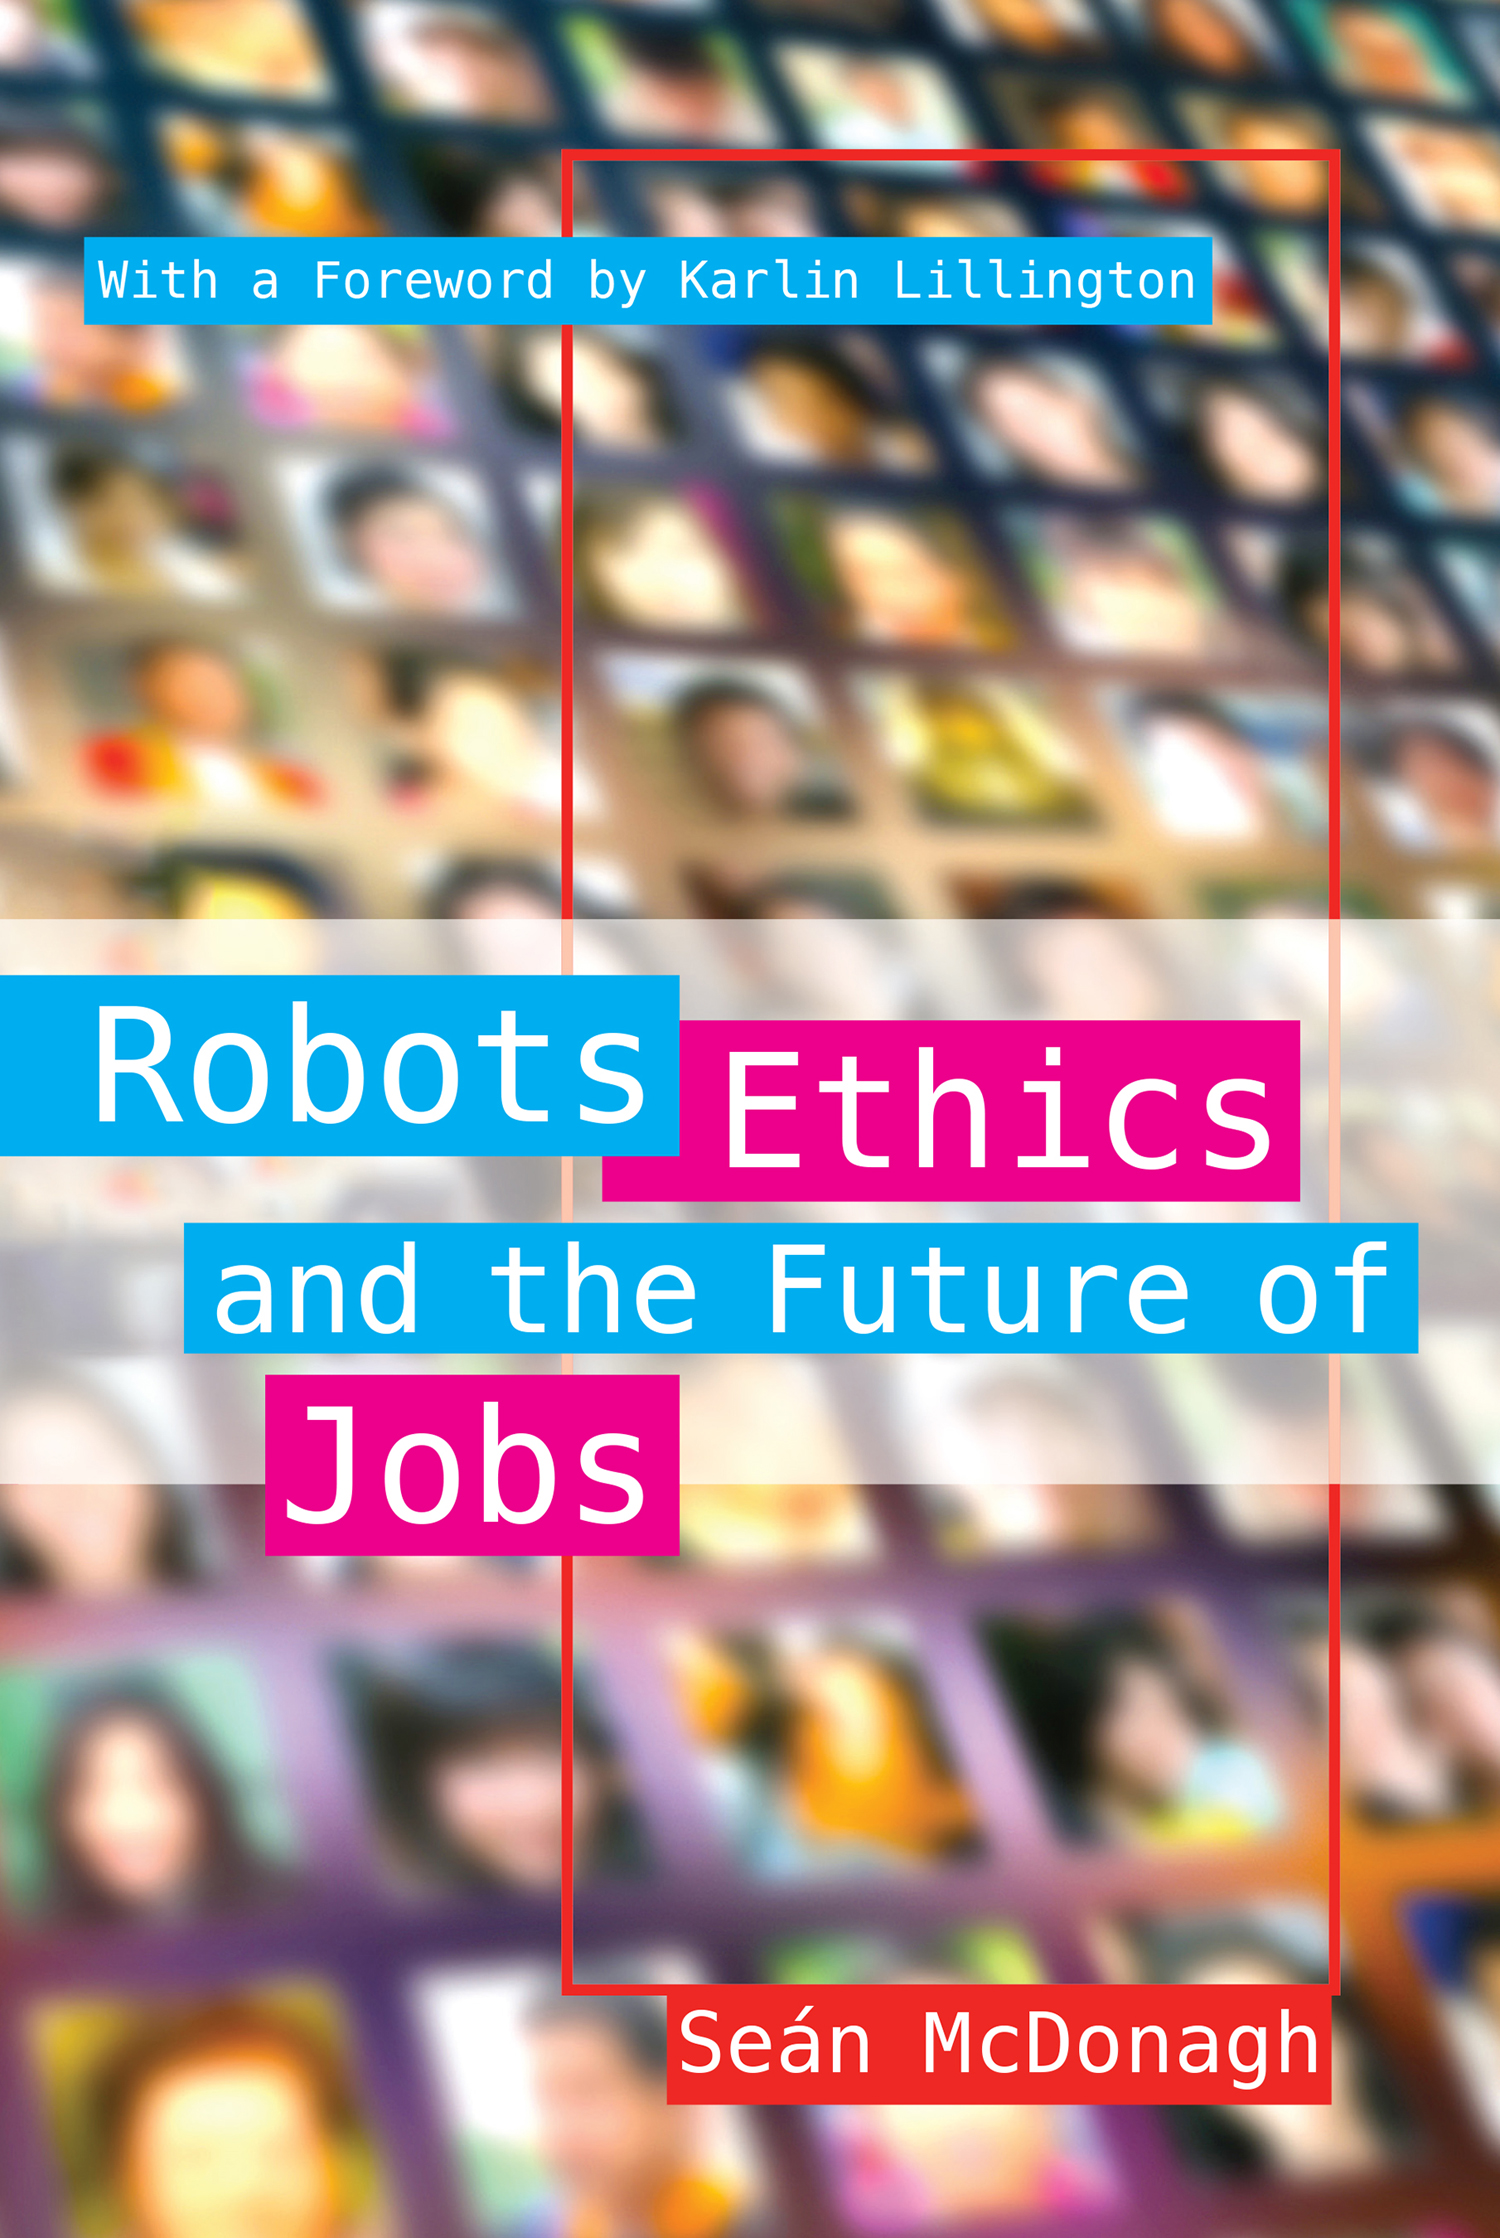 Robots, Ethics and the Future of Jobs - 10-14.99